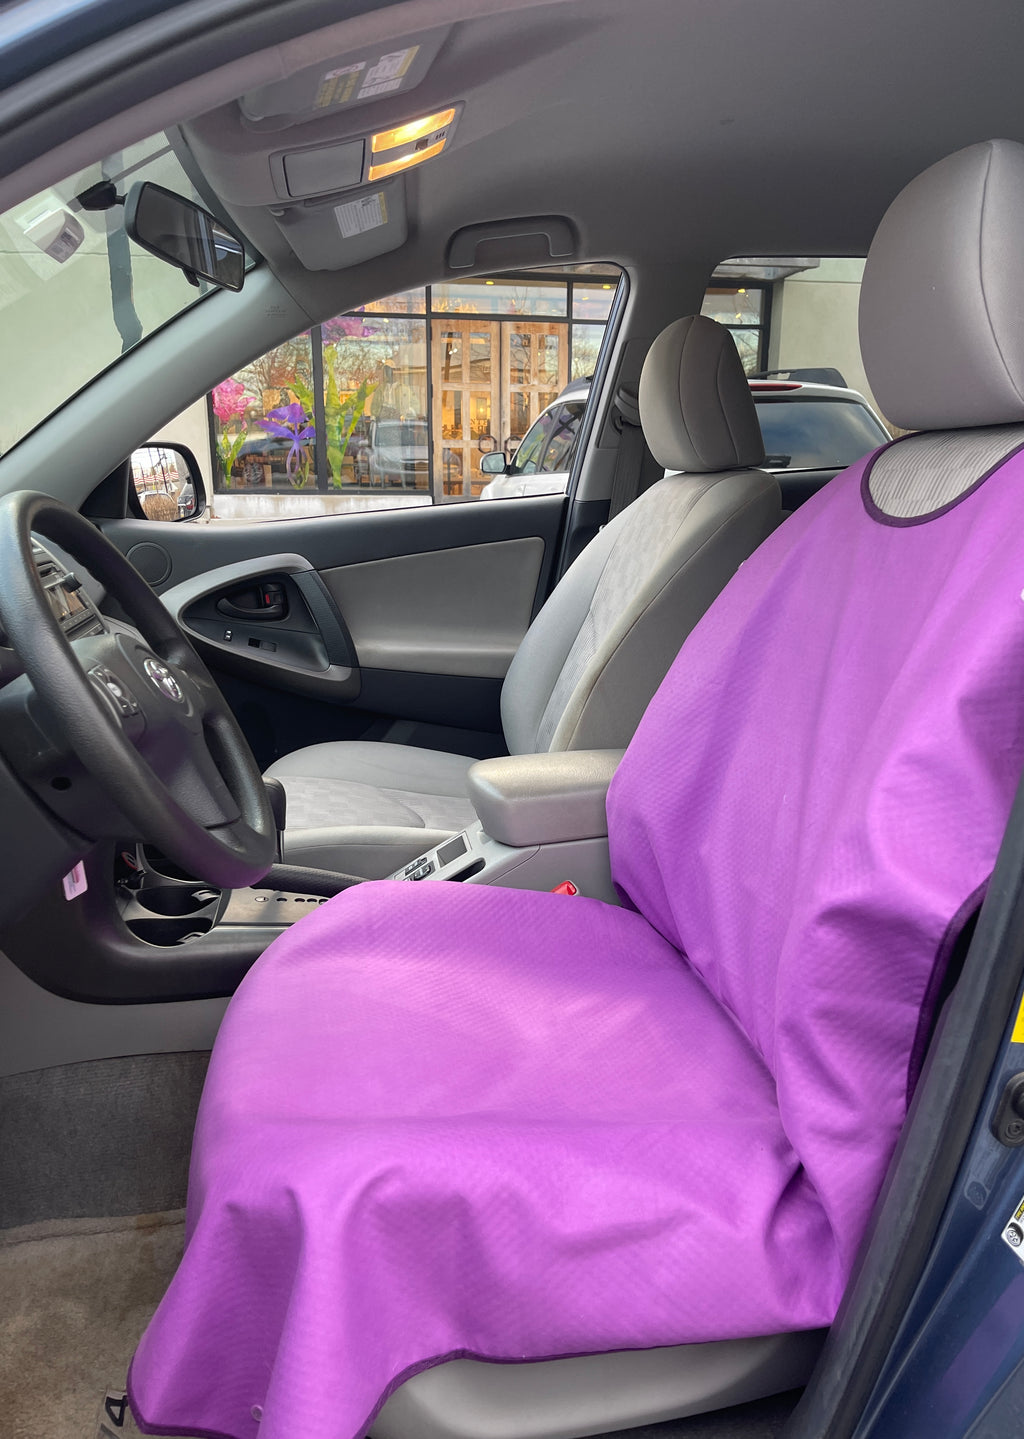 Lilac Waterproof Car Seat Cover – SeatSpin